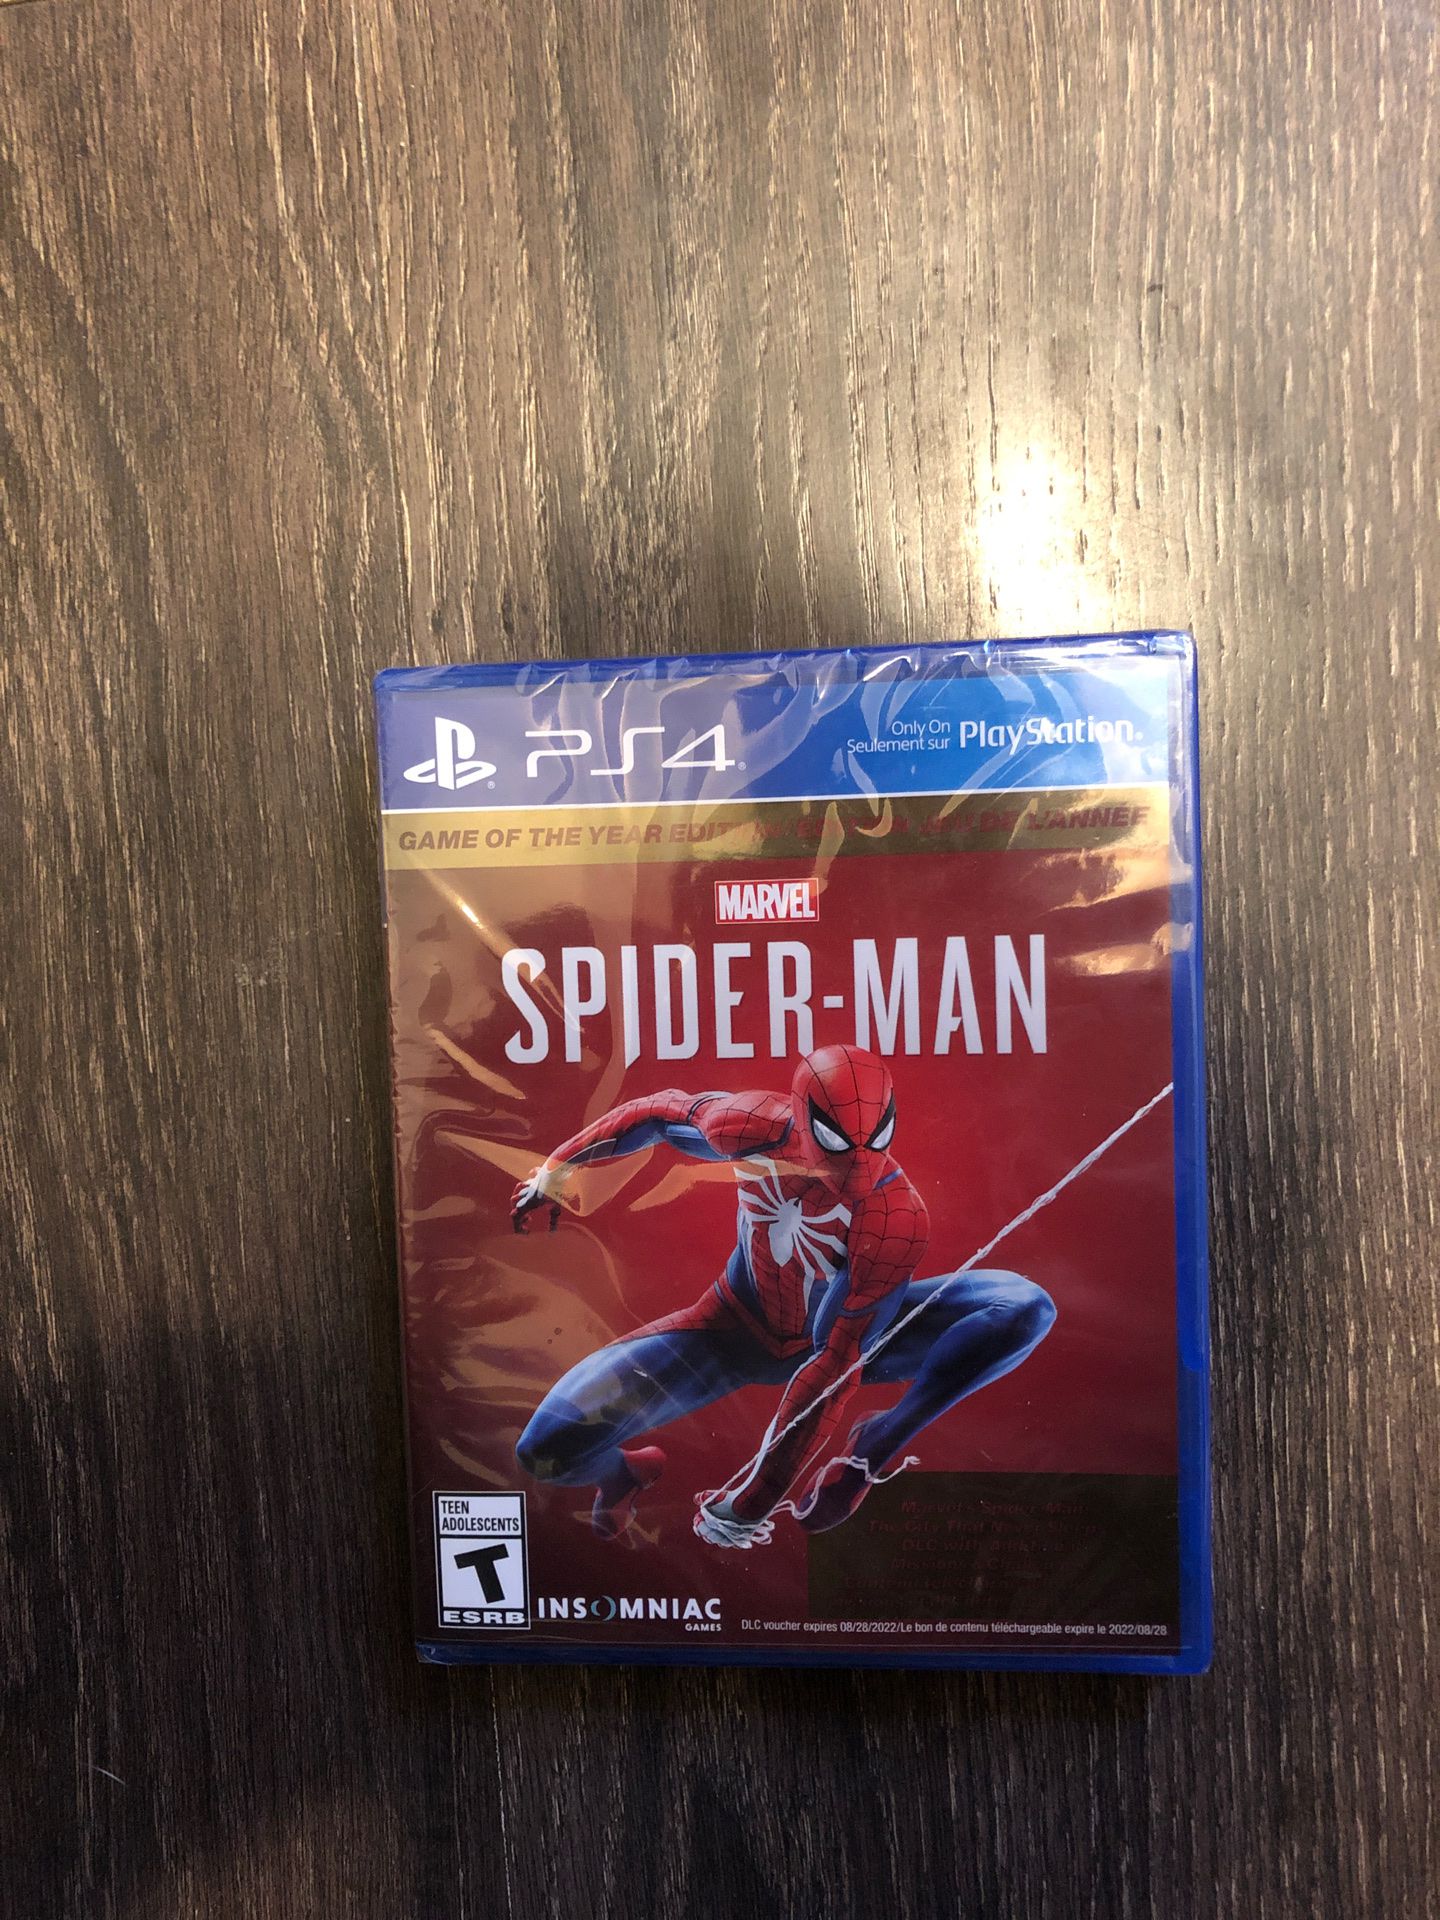 Spider-man ps4 for Tulare, CA - OfferUp